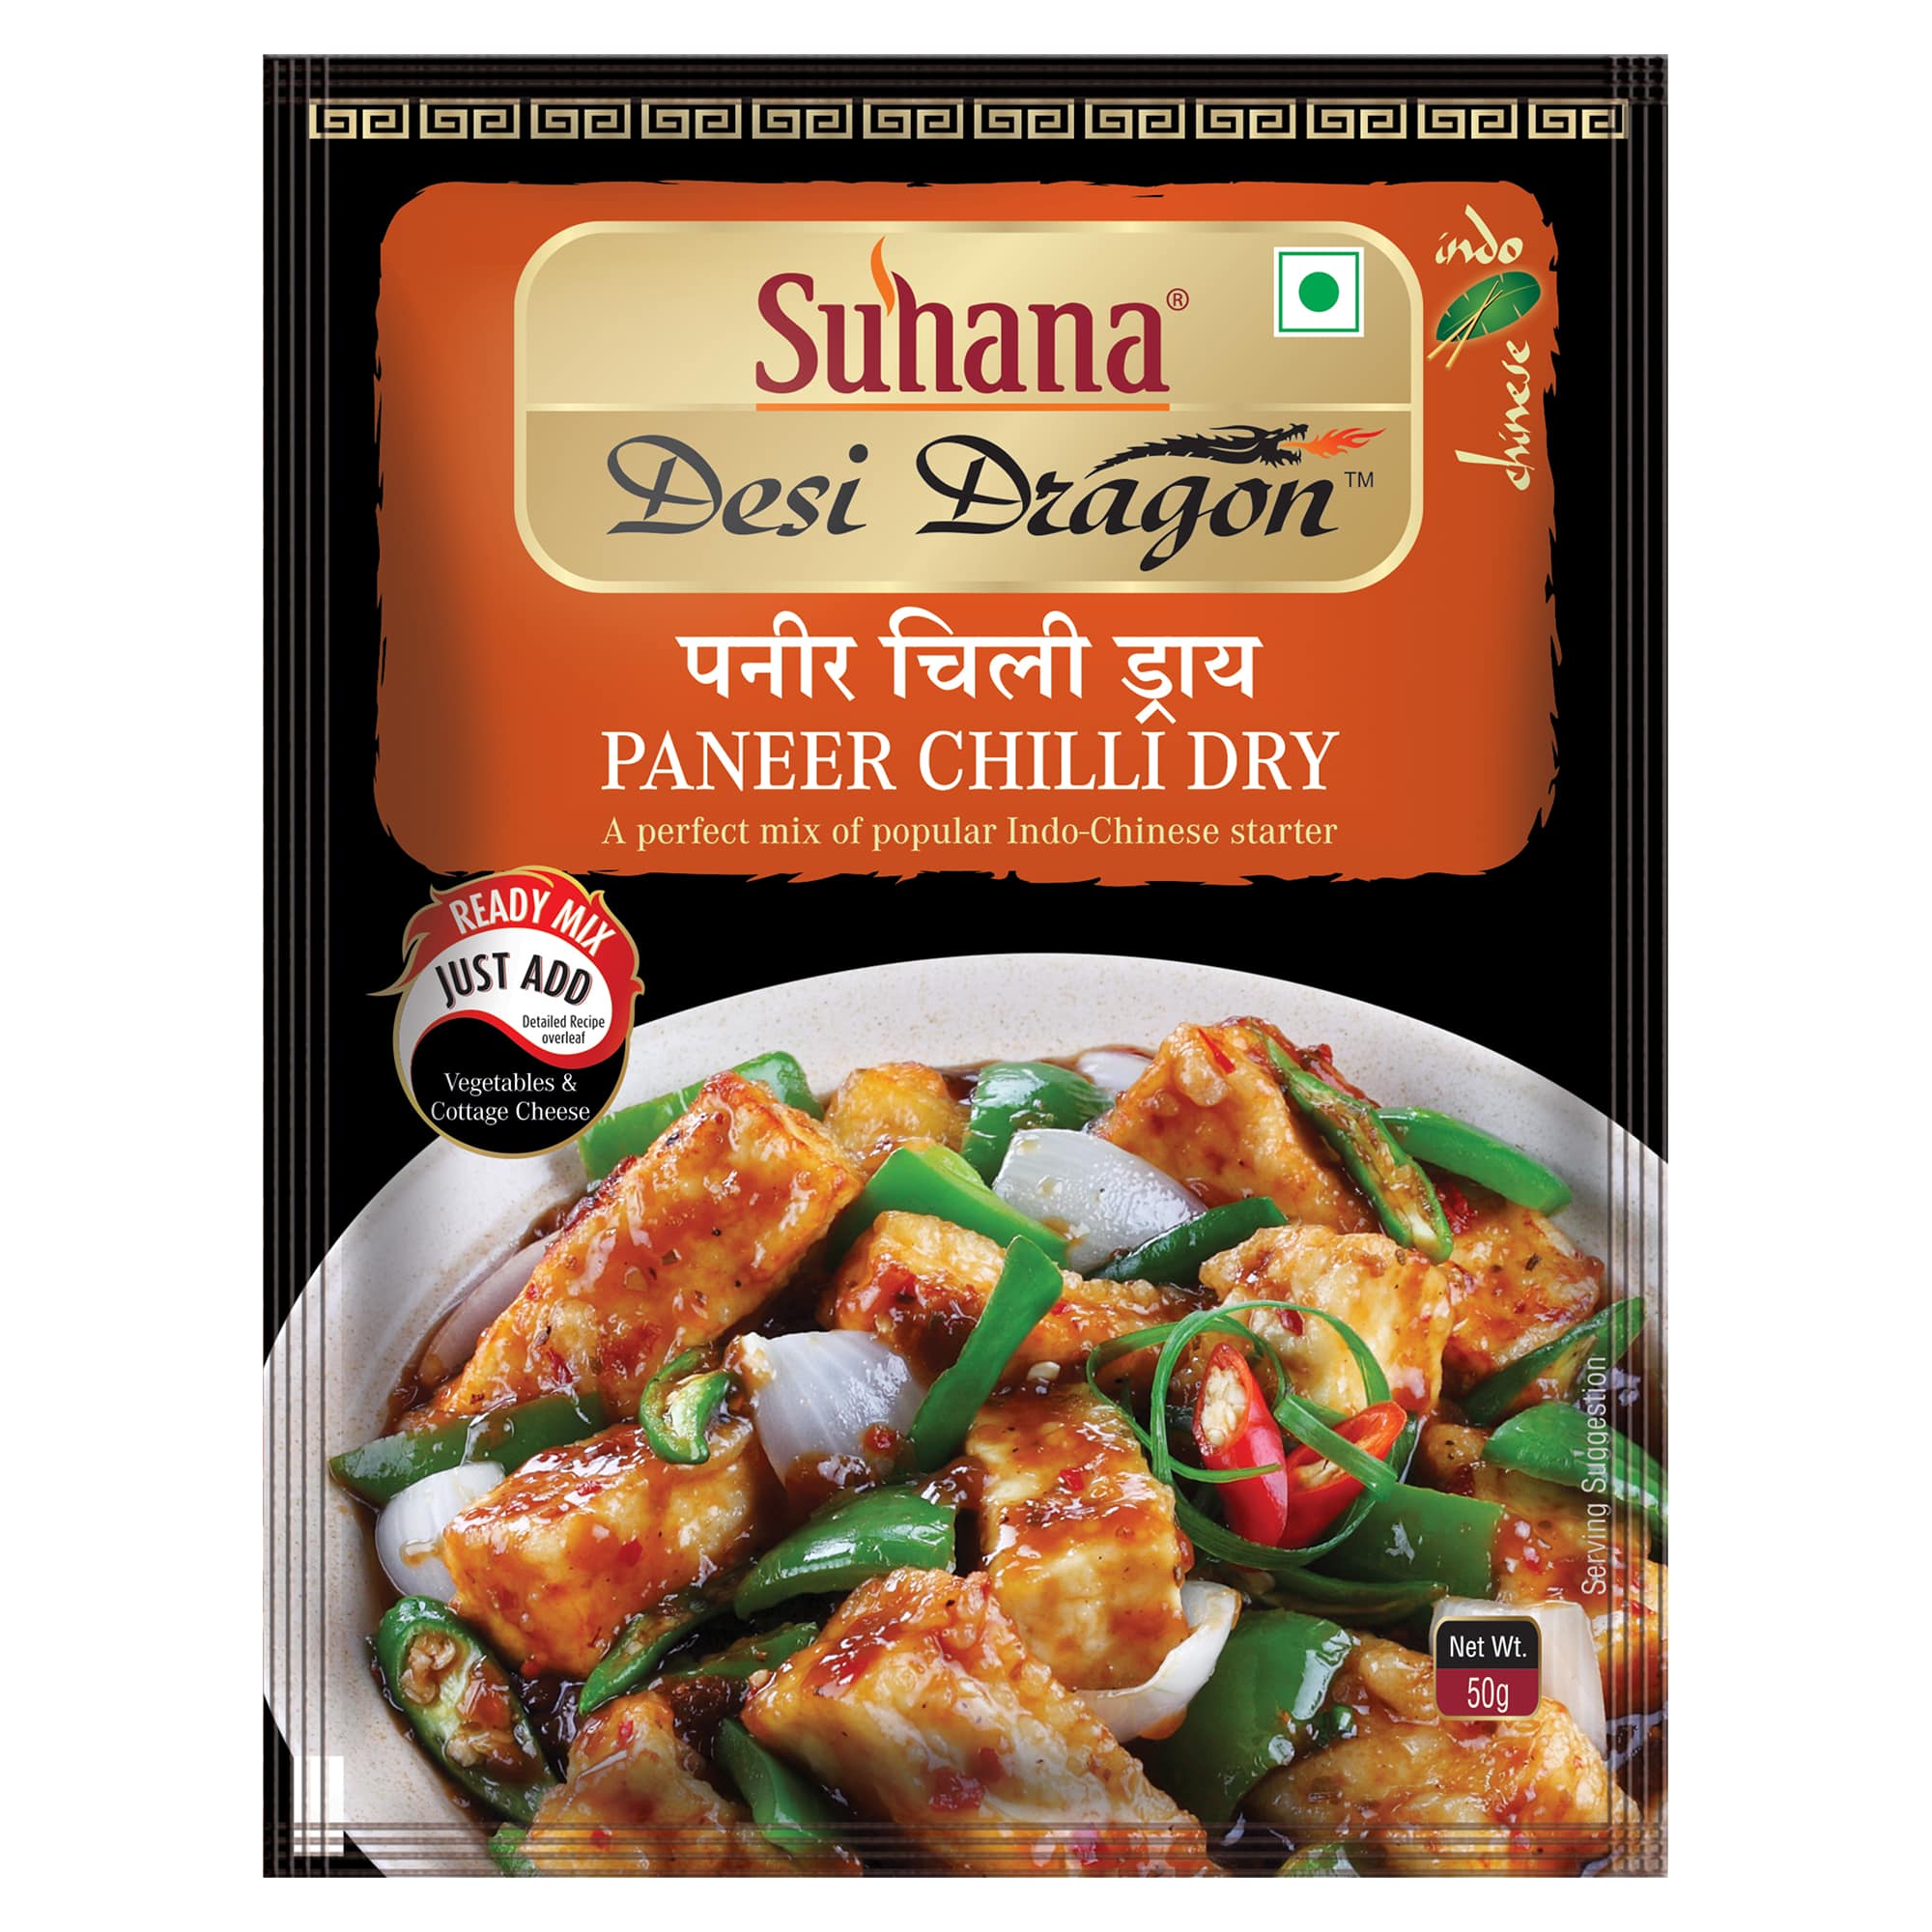 Suhana Paneer Chilli (Dry) Mix 50g Pouch